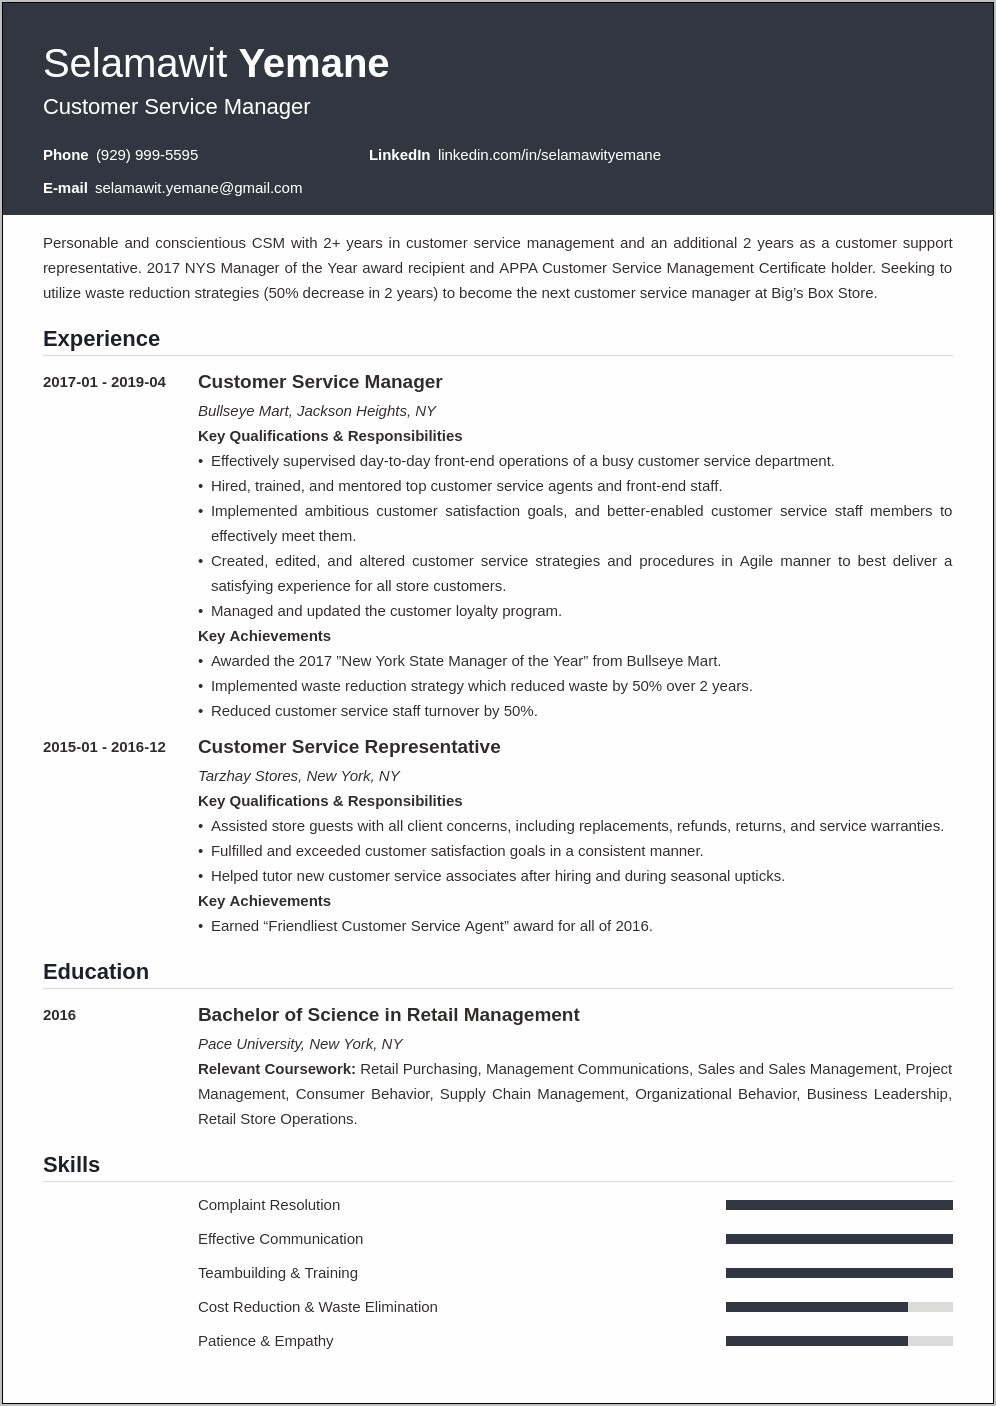 Customer Service Manager Summary For Resume